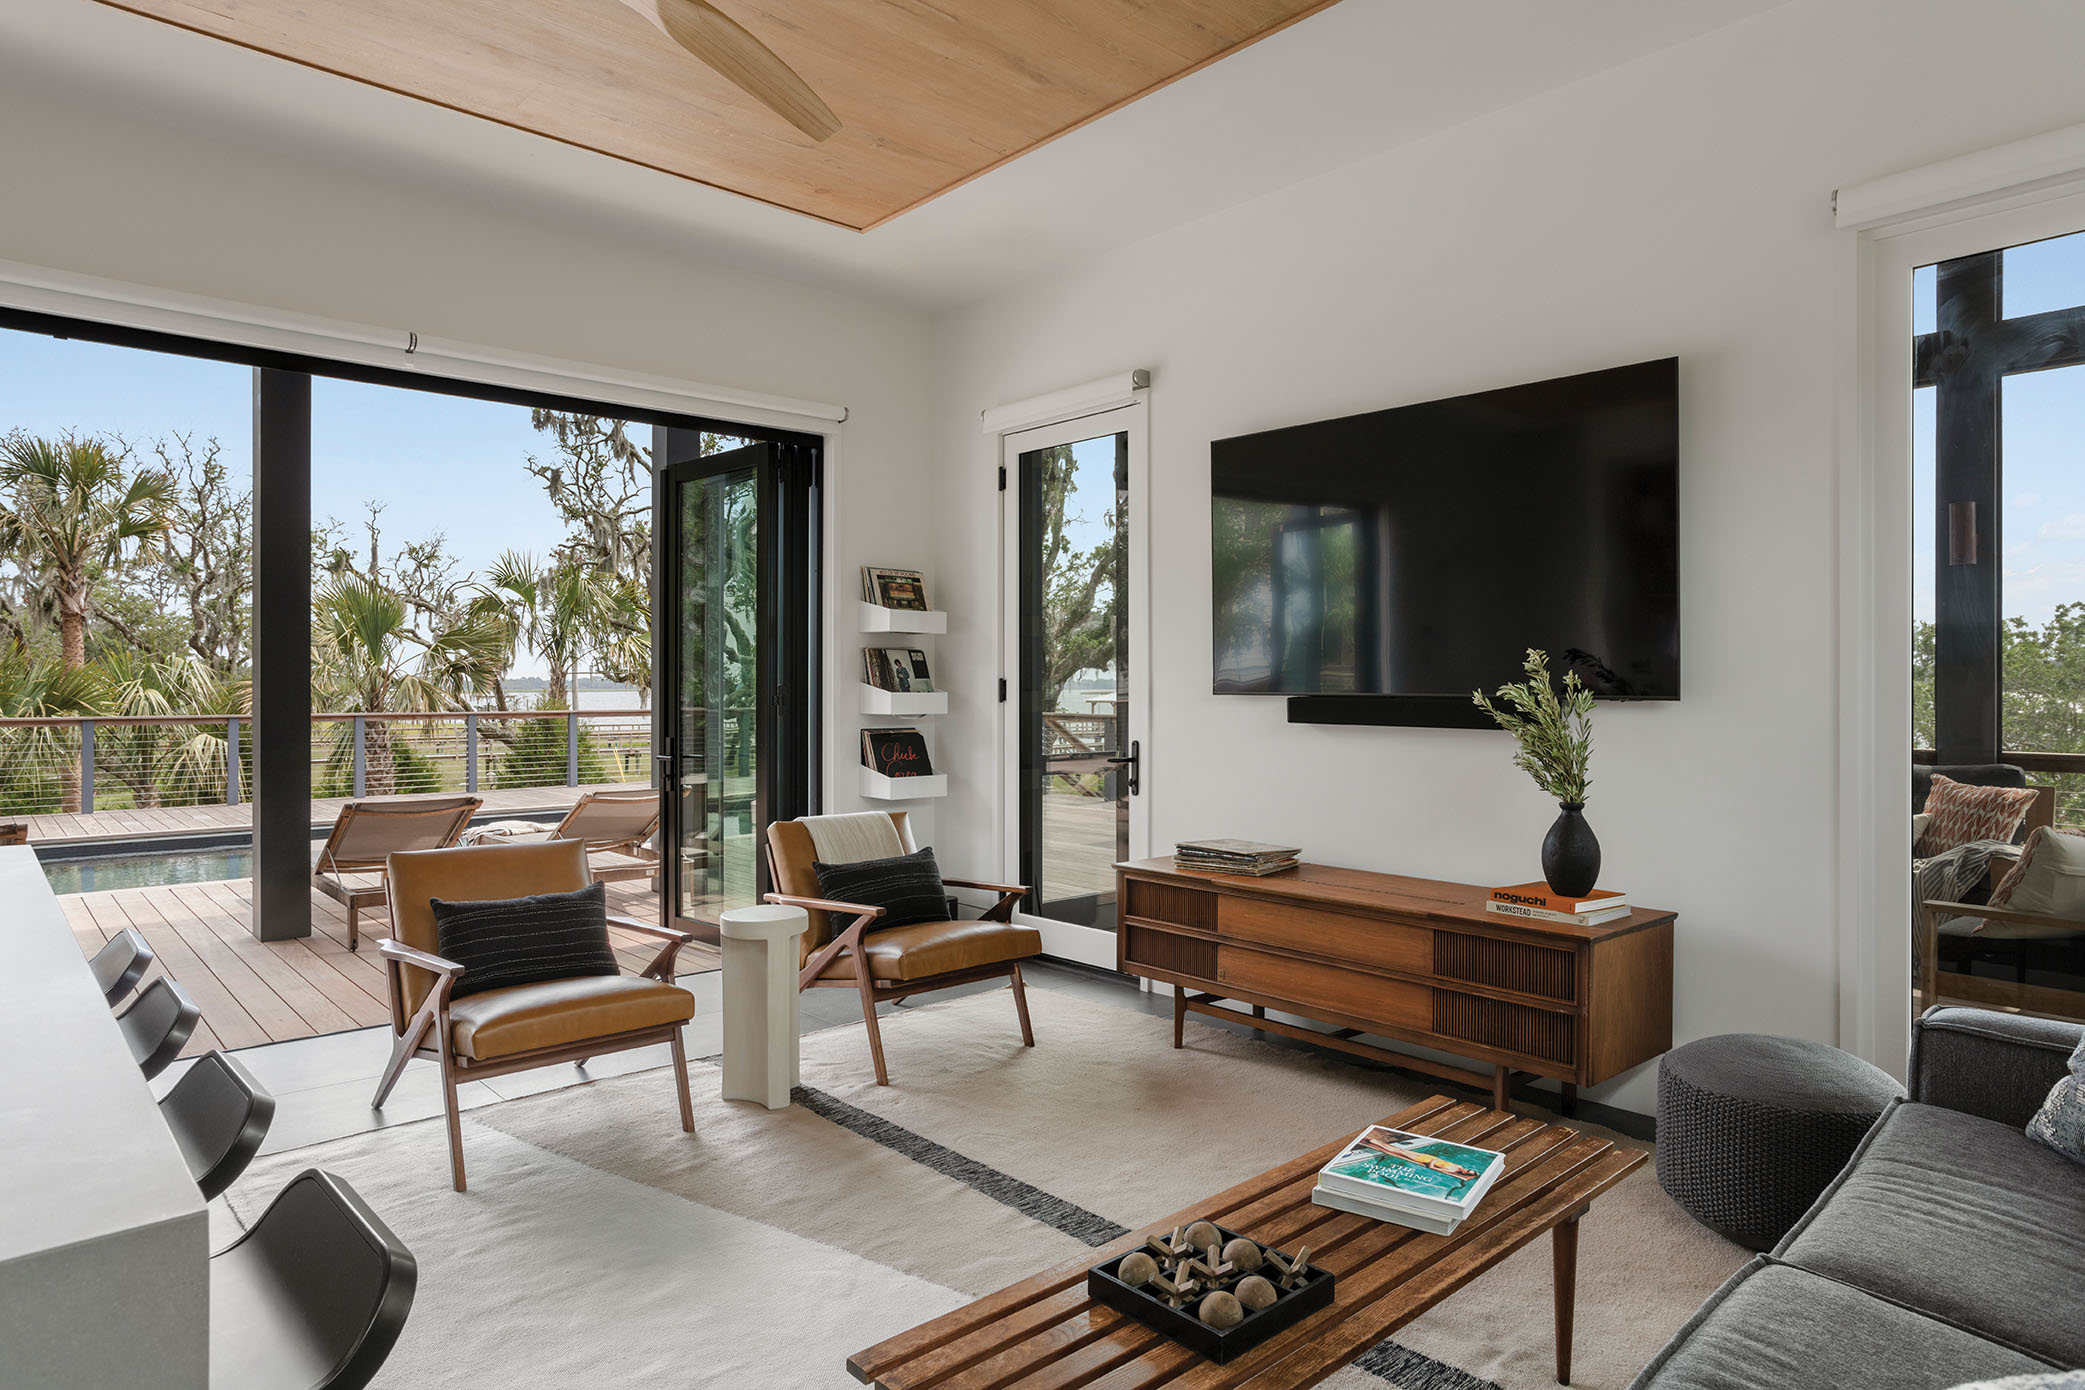 Cabana Fever: The spacious pool house can double as a guest room and features several midcentury modern pieces from the Dunns’ Columbia home. A special find is the vintage GE stereo console, for playing their collection of LPs.